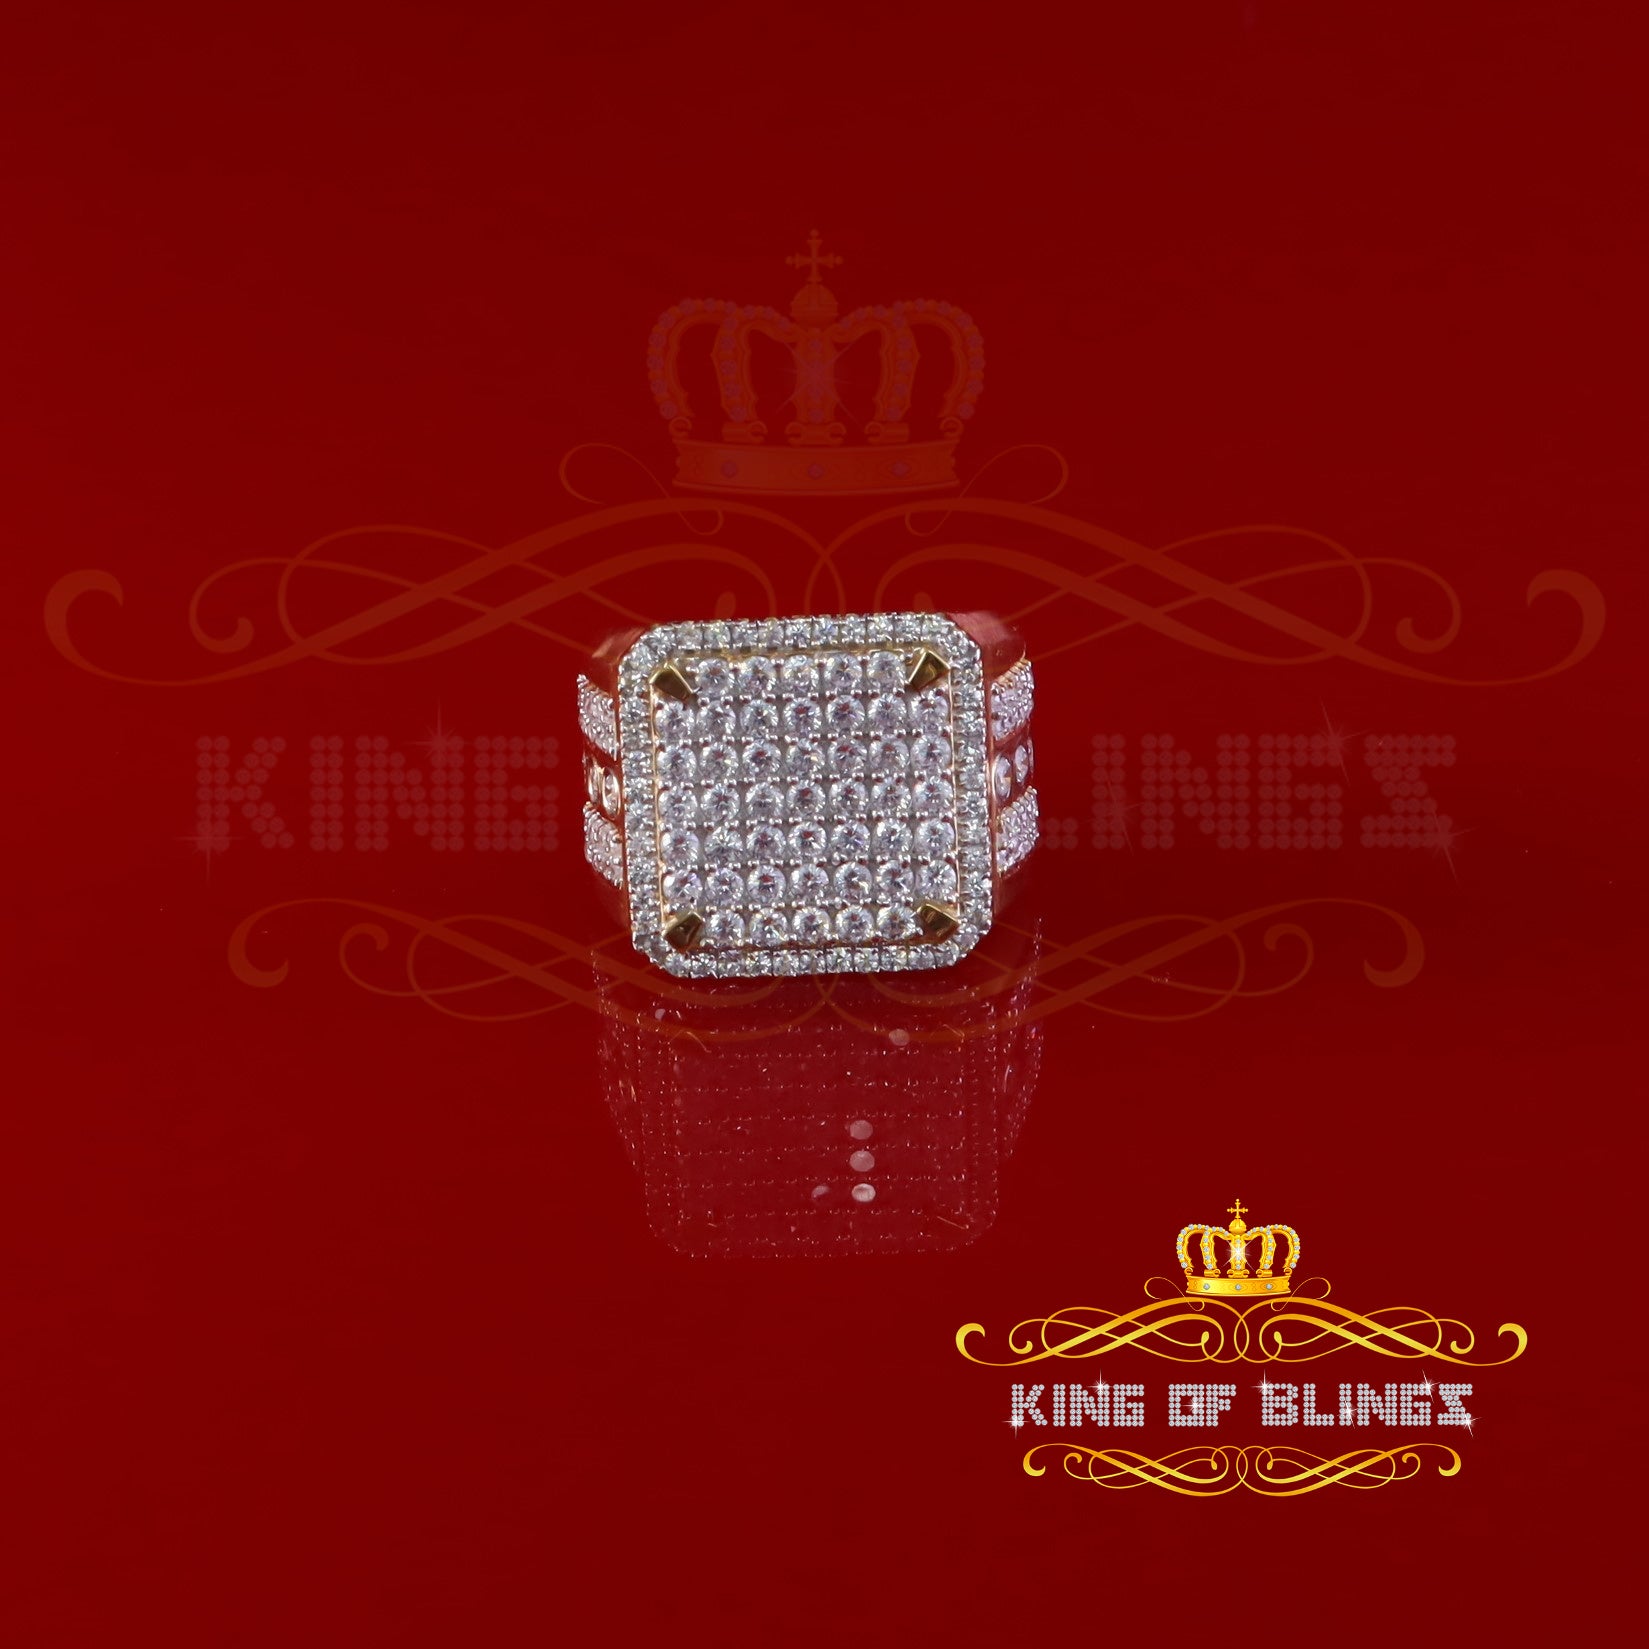 King Of Bling's Big Look yellow Sterling Silver 4.90ct Cubic Zirconia Square Men's Ring SZ 9 KING OF BLINGS